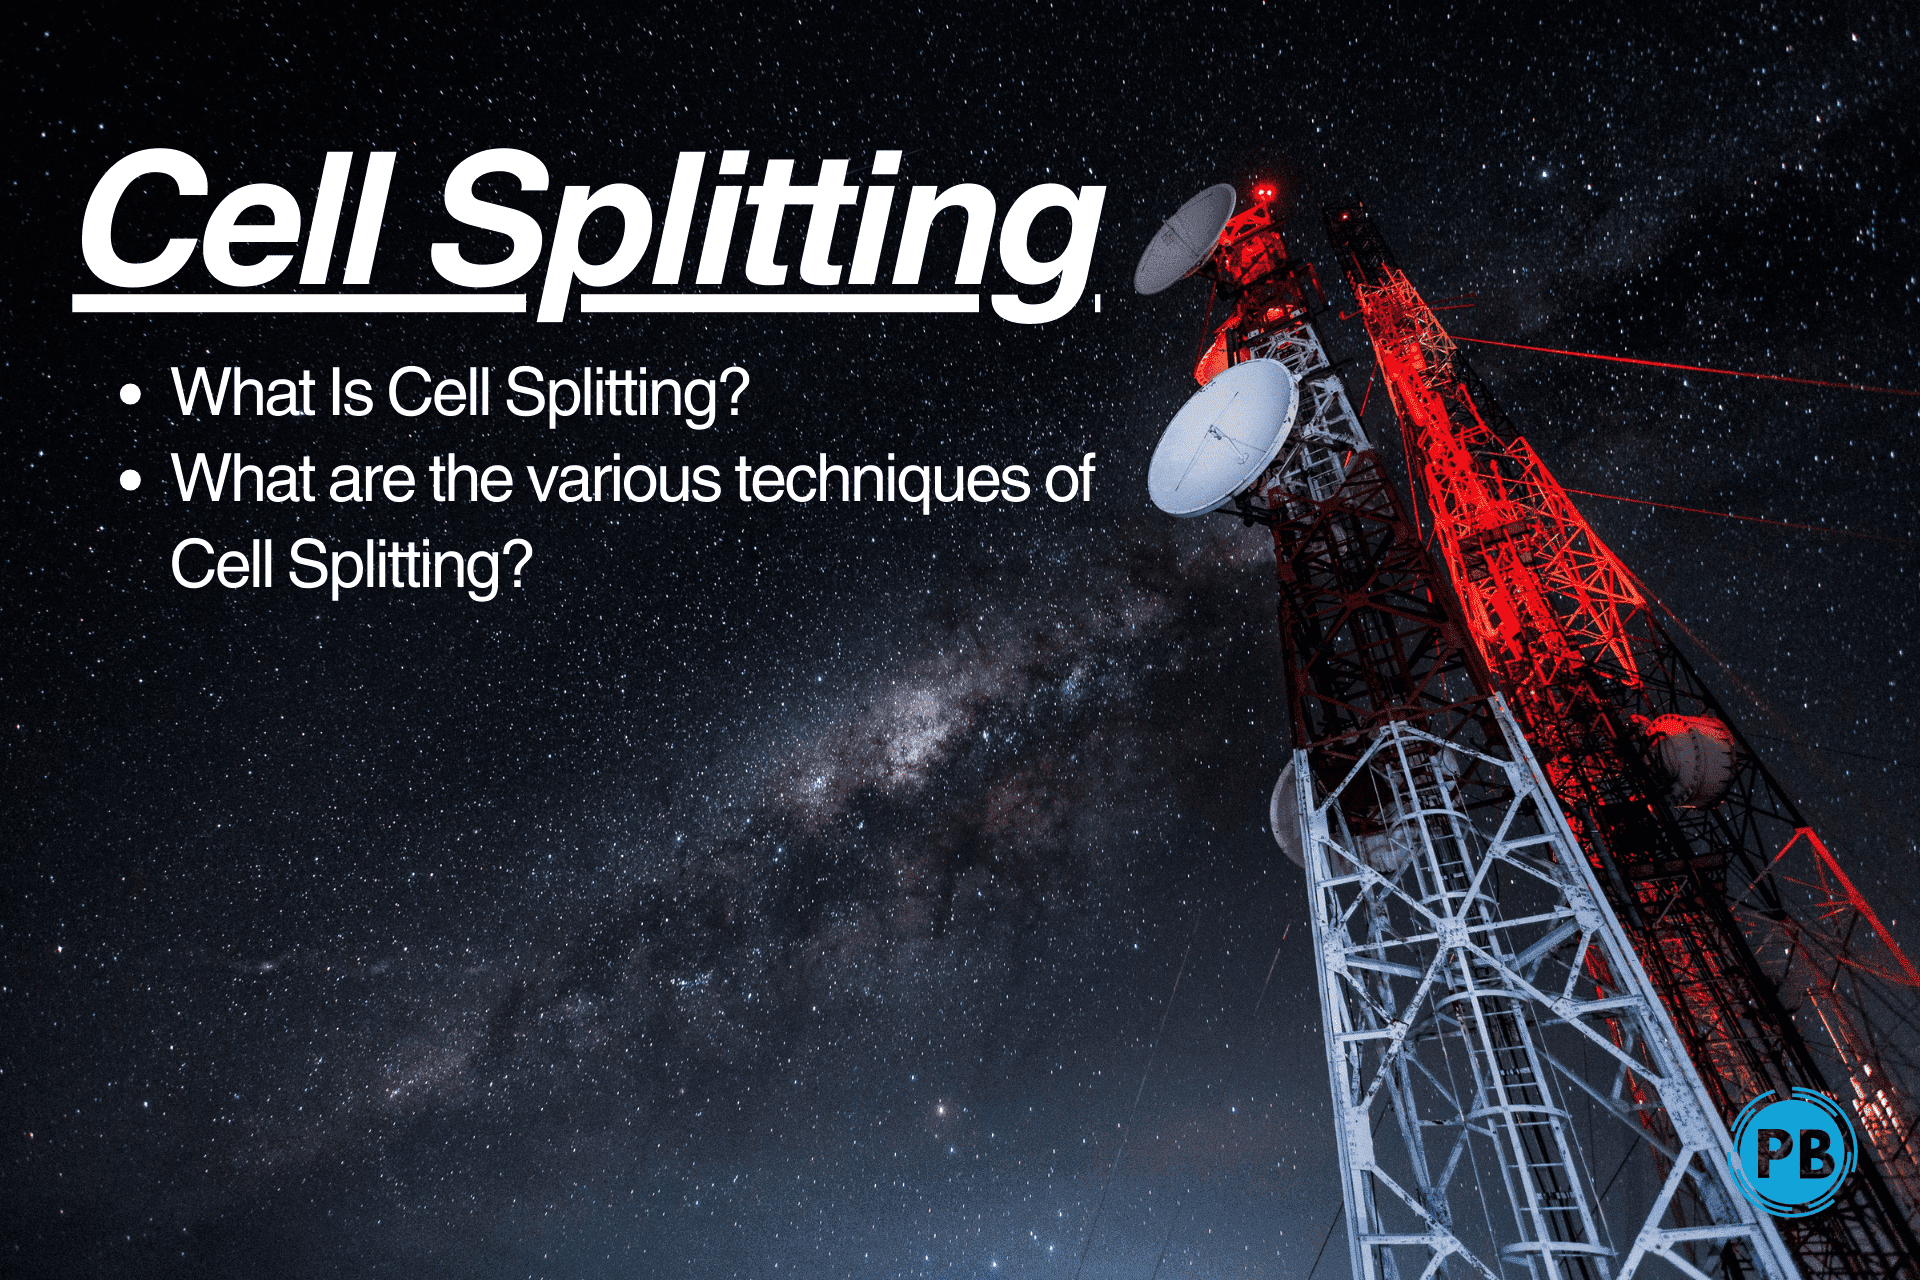 What is Cell Splitting and its various techniques?